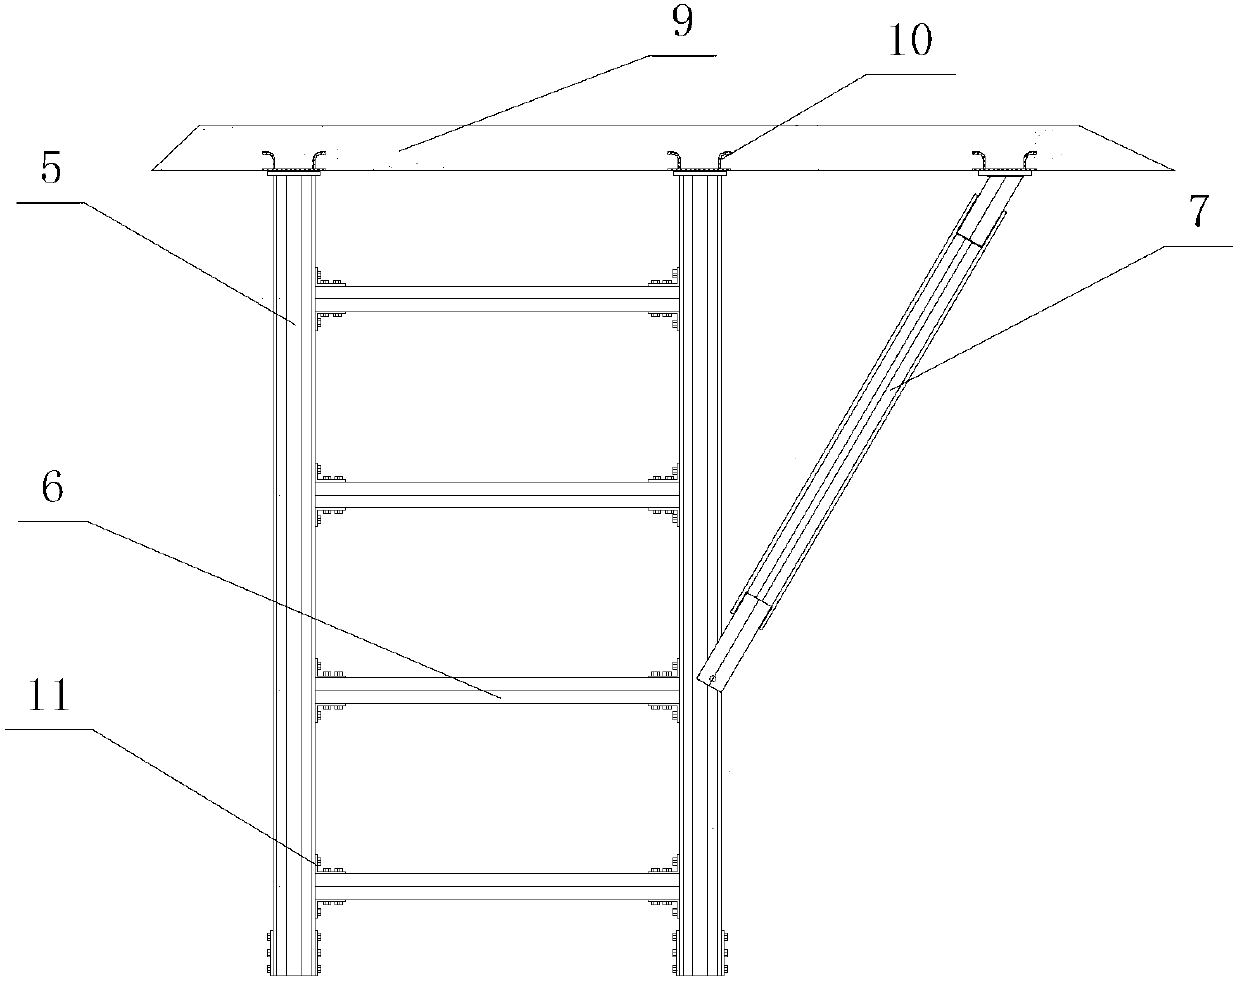 Novel anti-seismic supporting hanger of cable tray